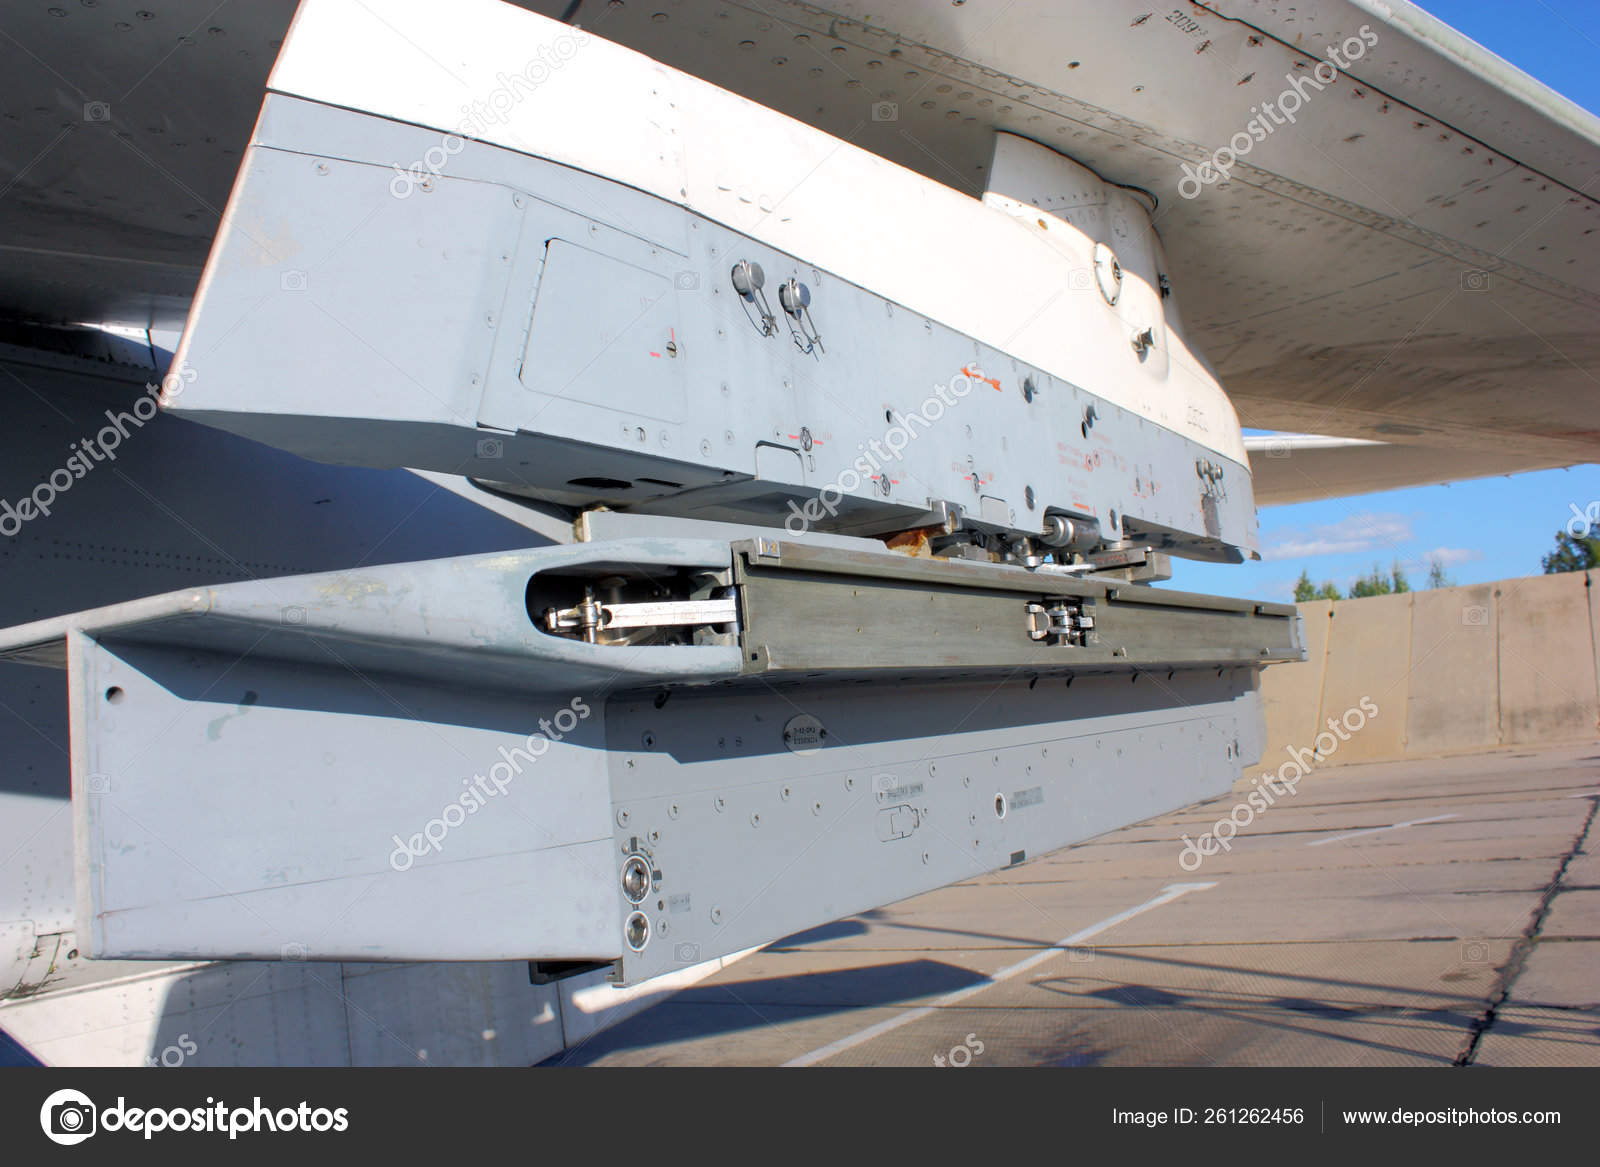 Holder Two Rockets Wing Plane Changeable Geometry Wing Stock Photo C Yayimages